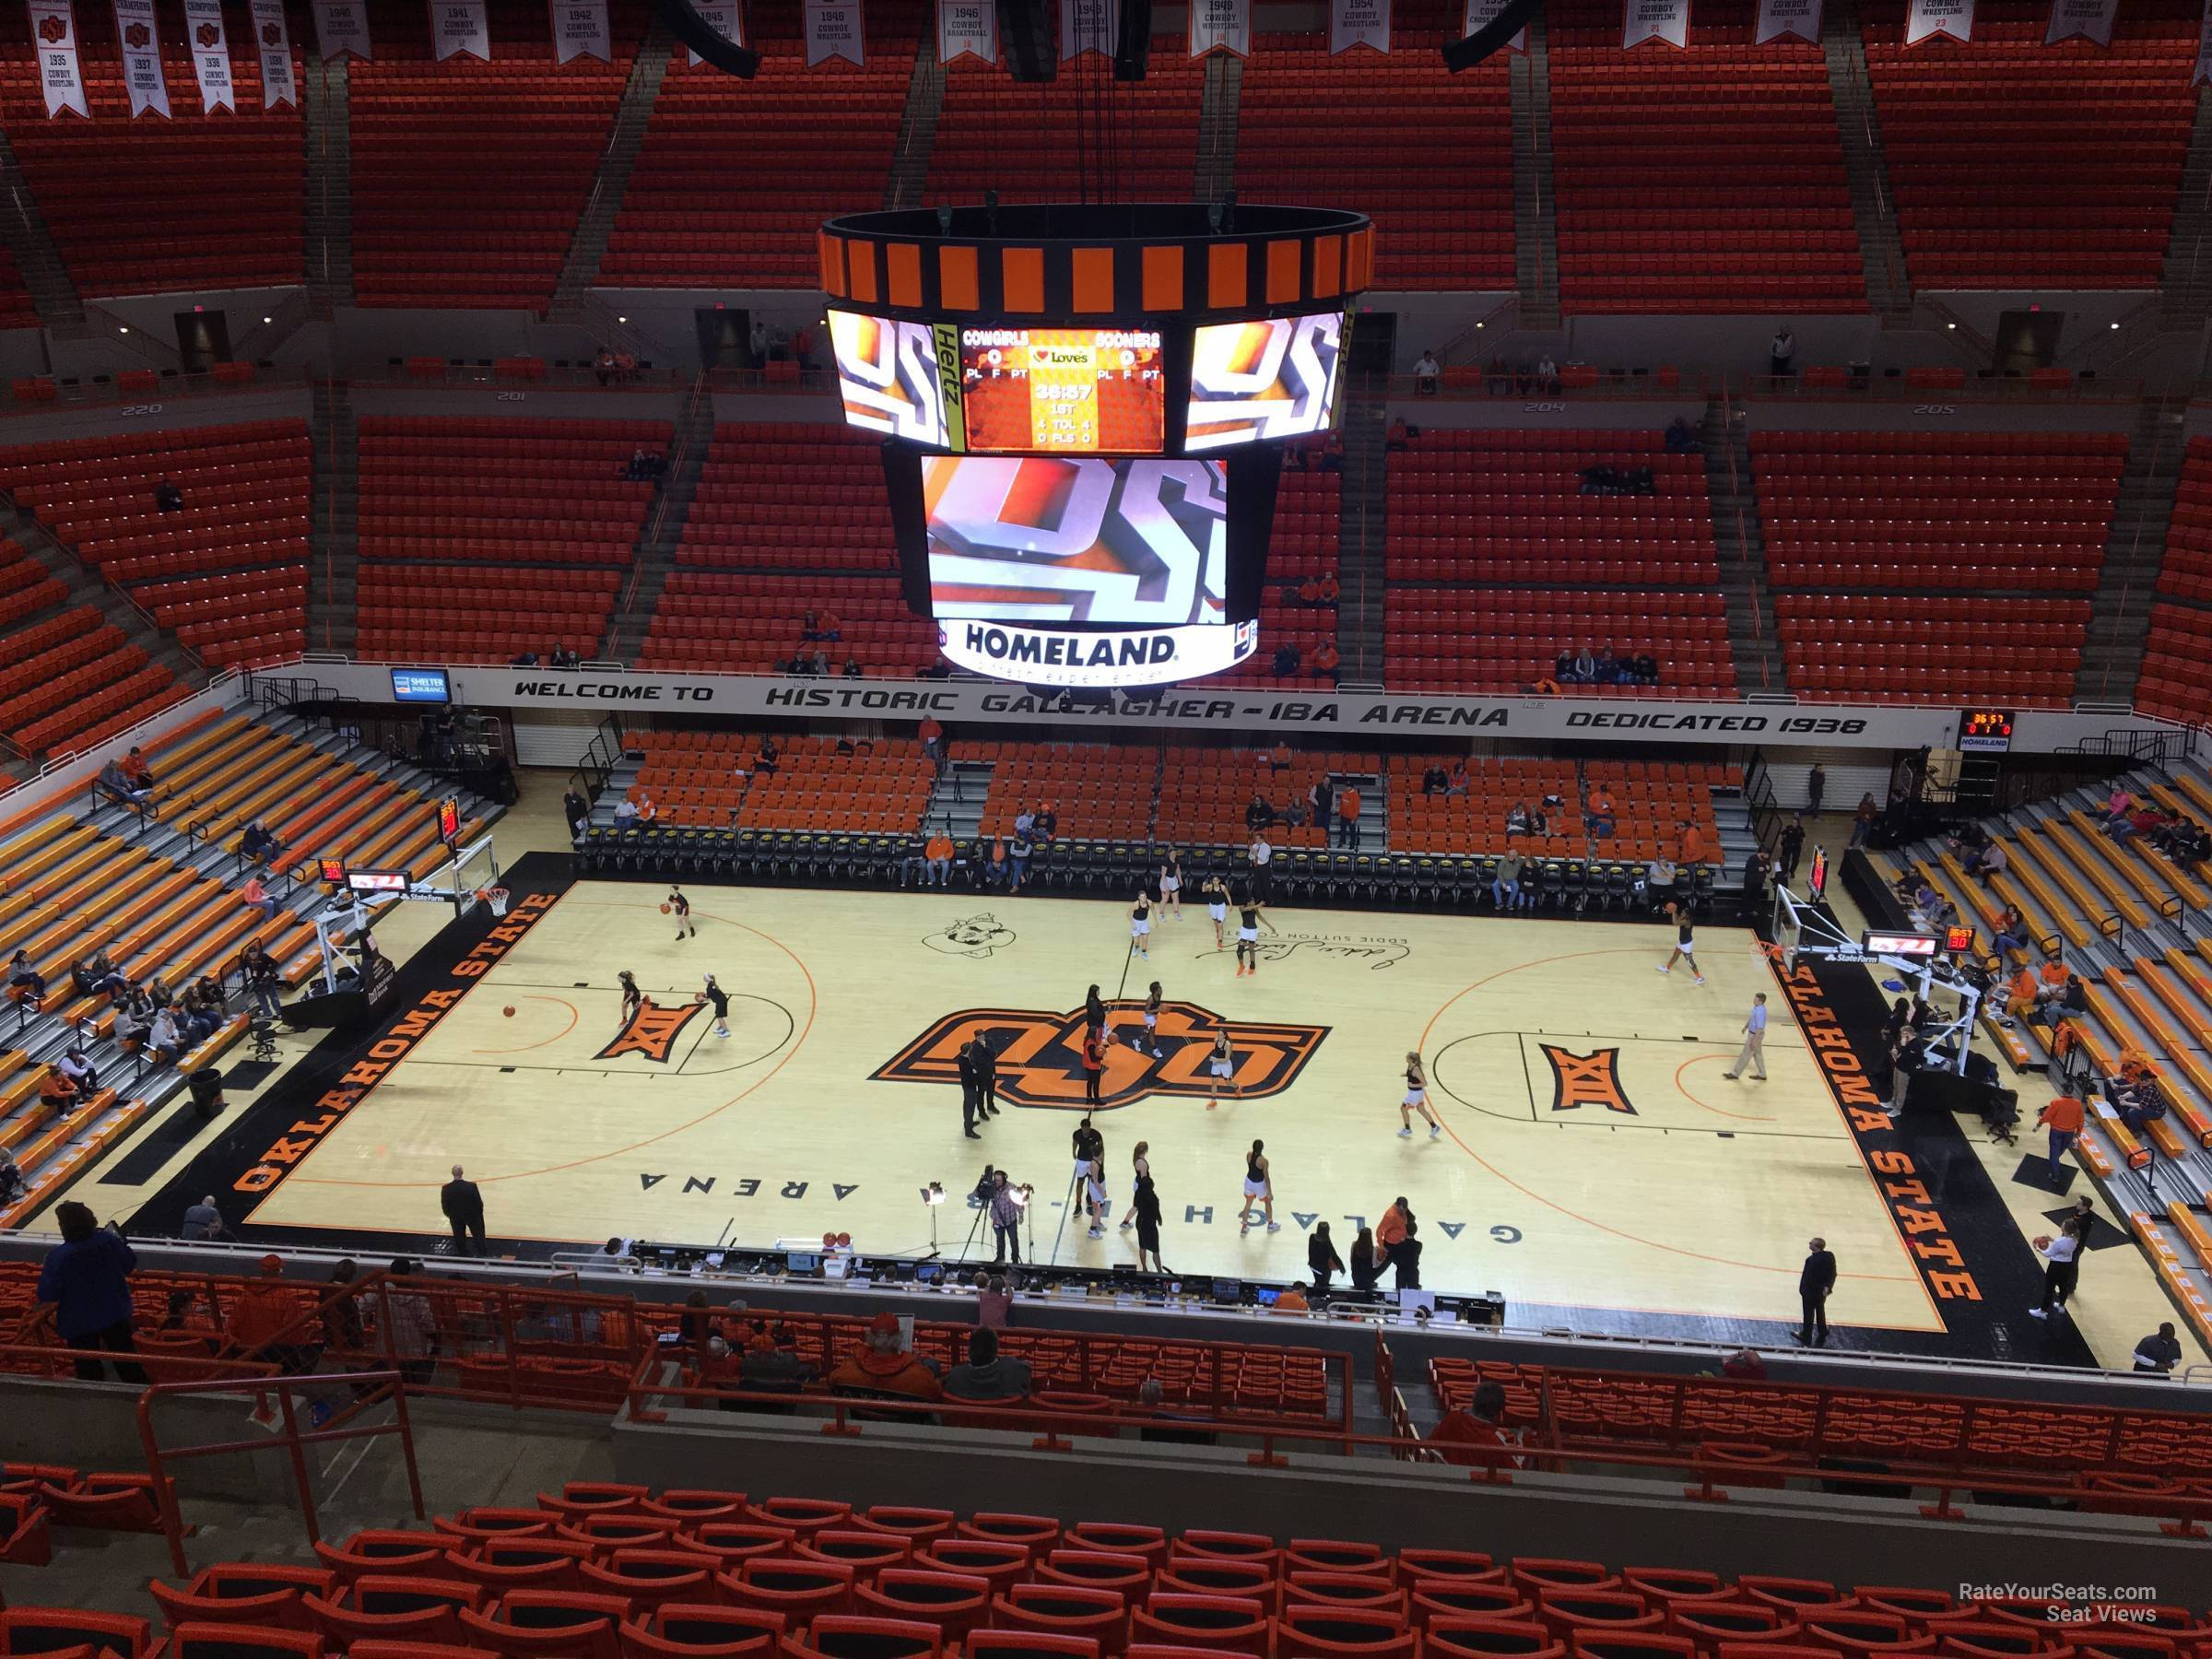 section 317, row 10 seat view  - gallagher-iba arena